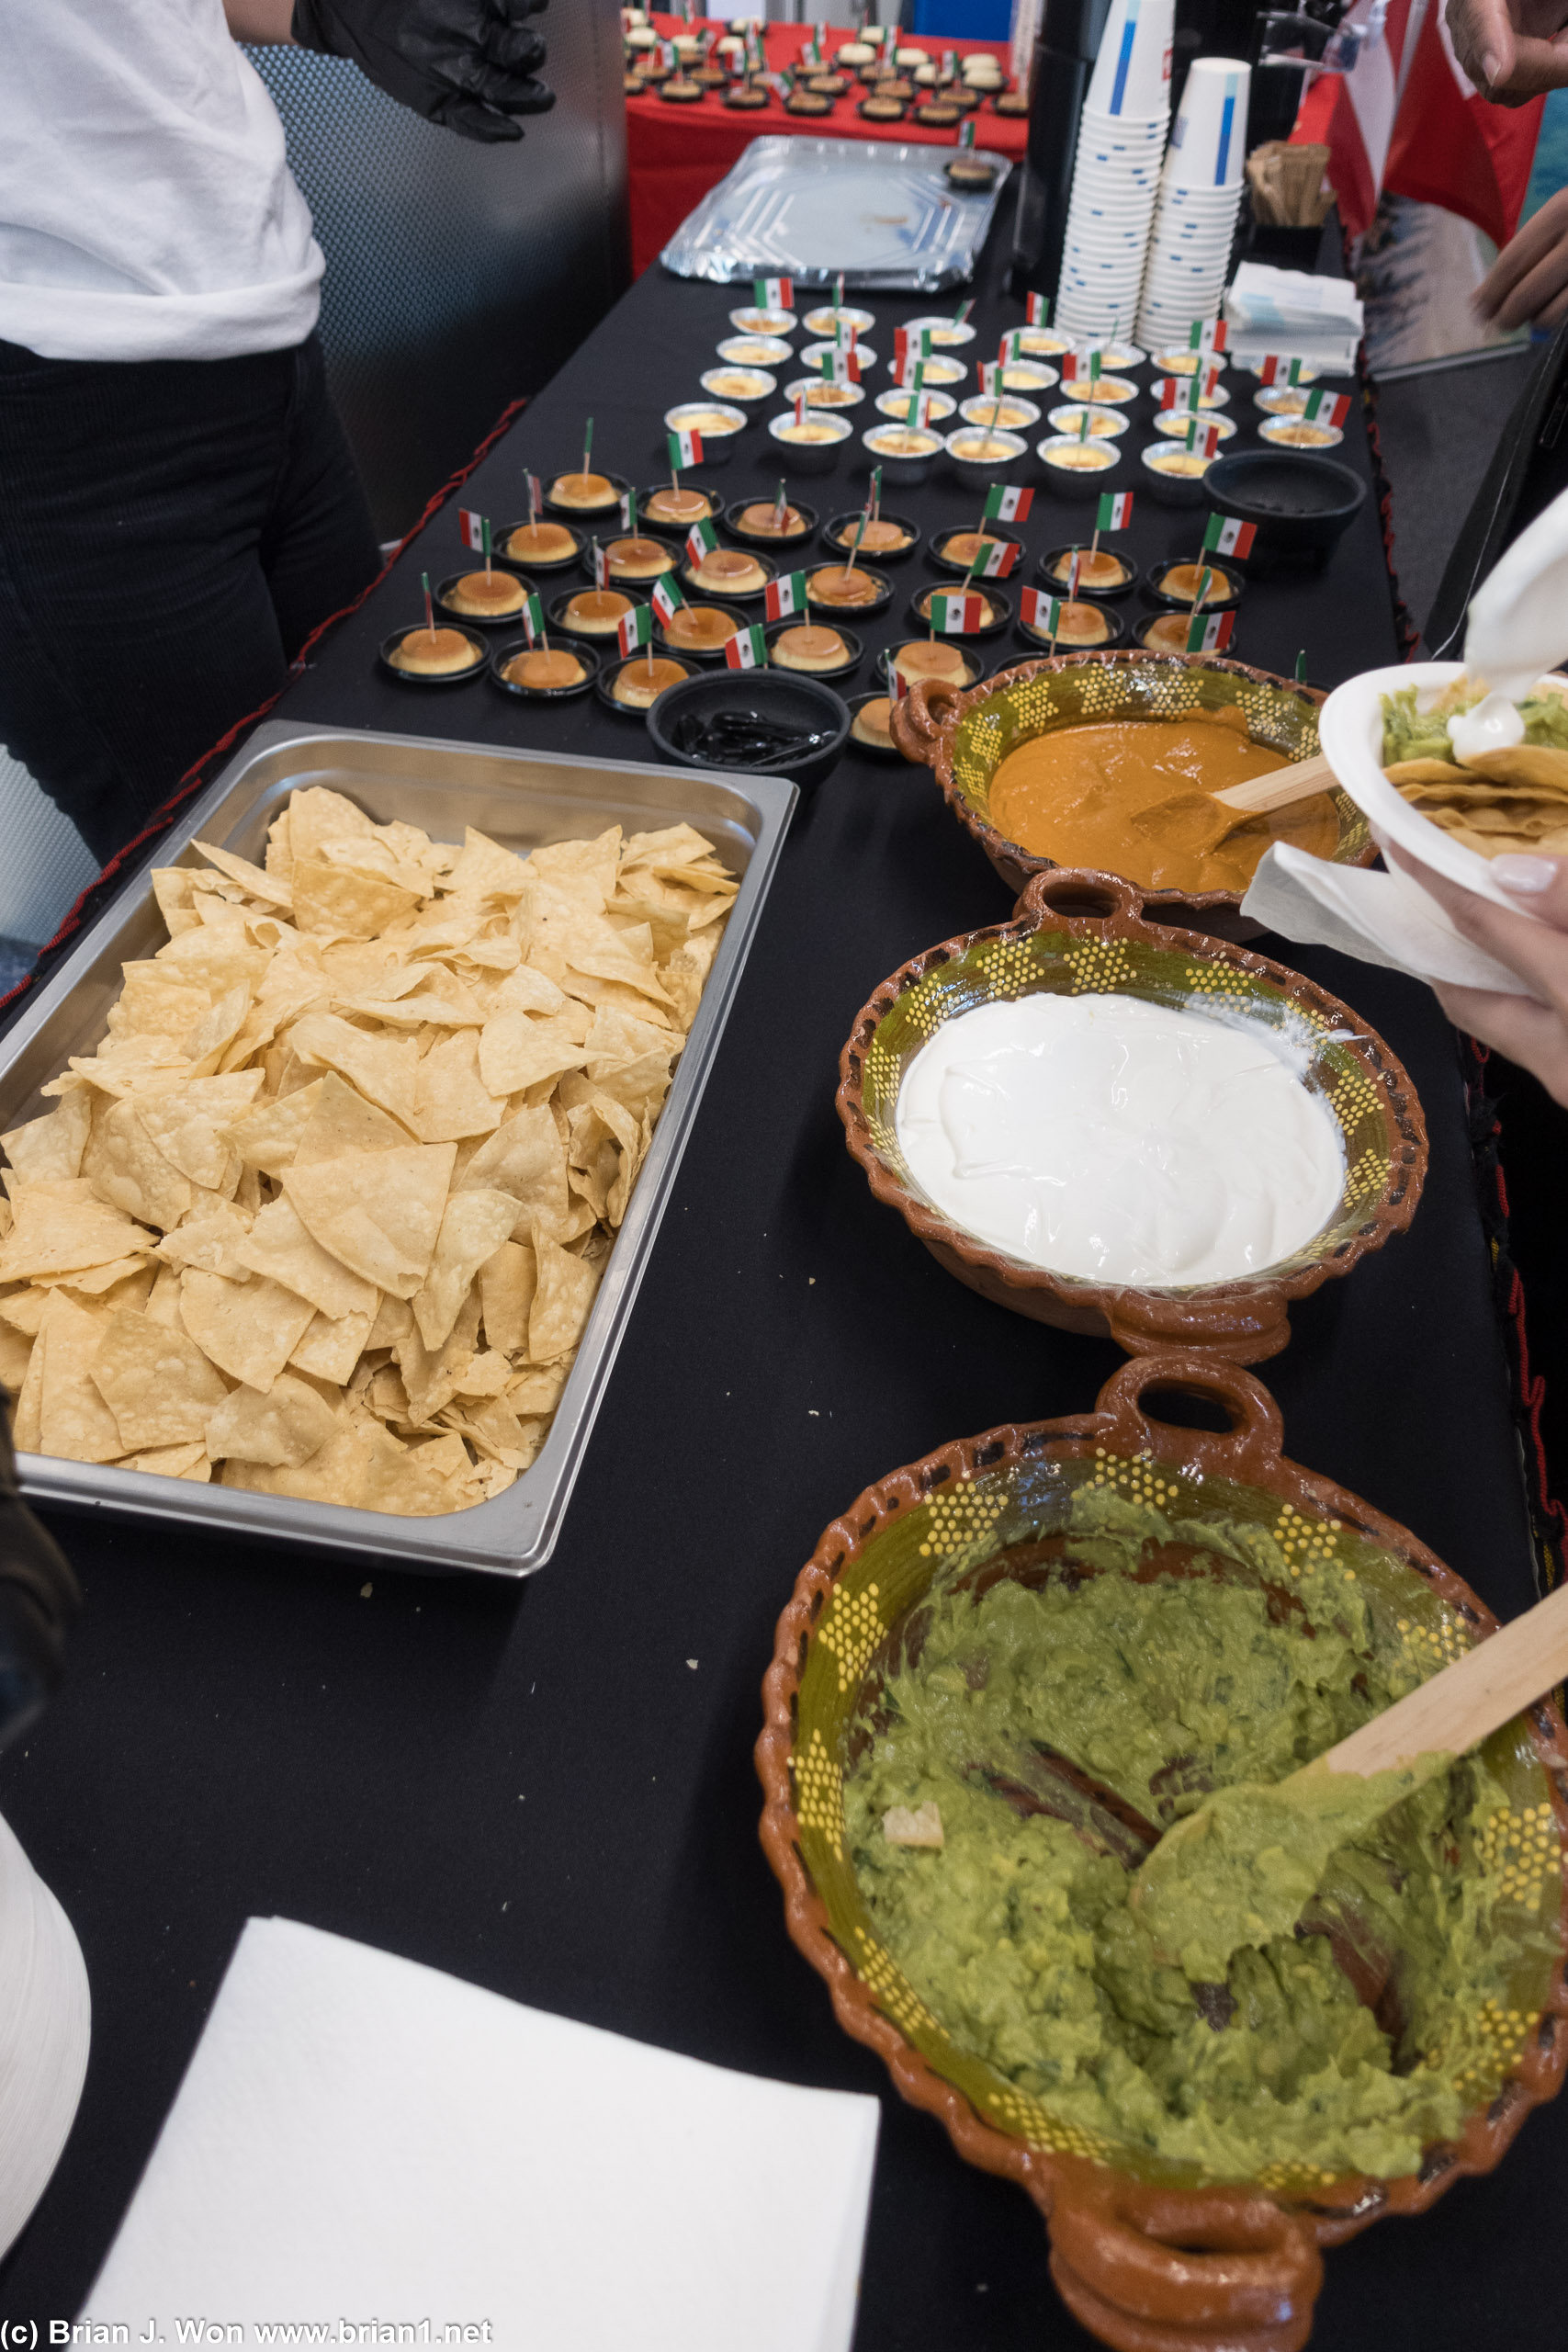 Chips and guac.